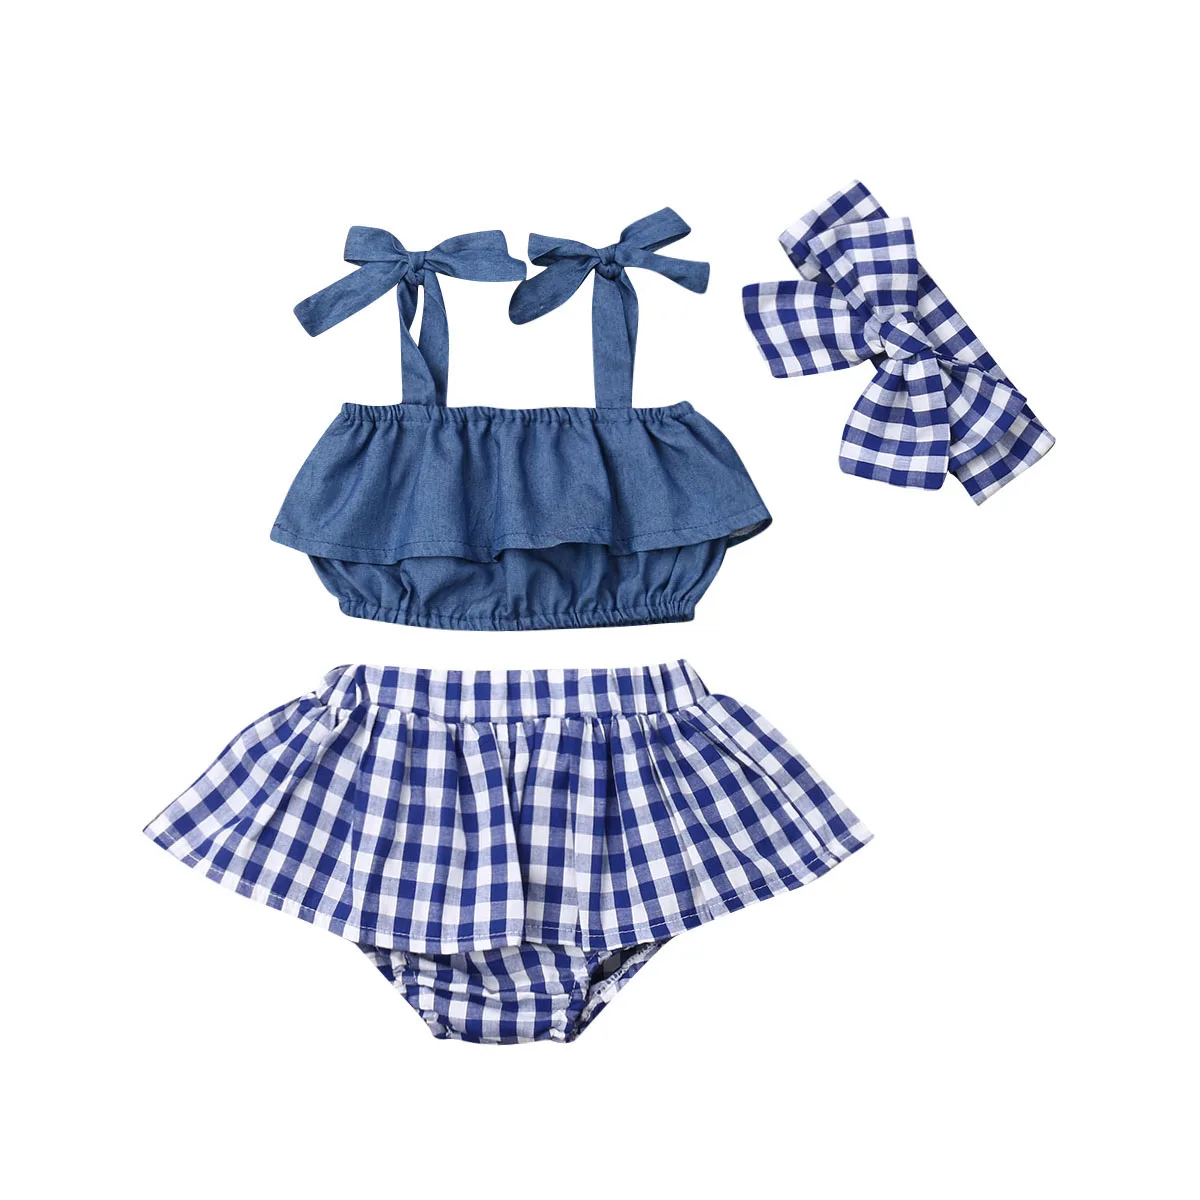 

Pudcoco Summer Newborn Baby Girl Clothes sets Sling Ruffle Crop Top Plaid Mini Skirt Headband 3Pcs Outfits Clothes